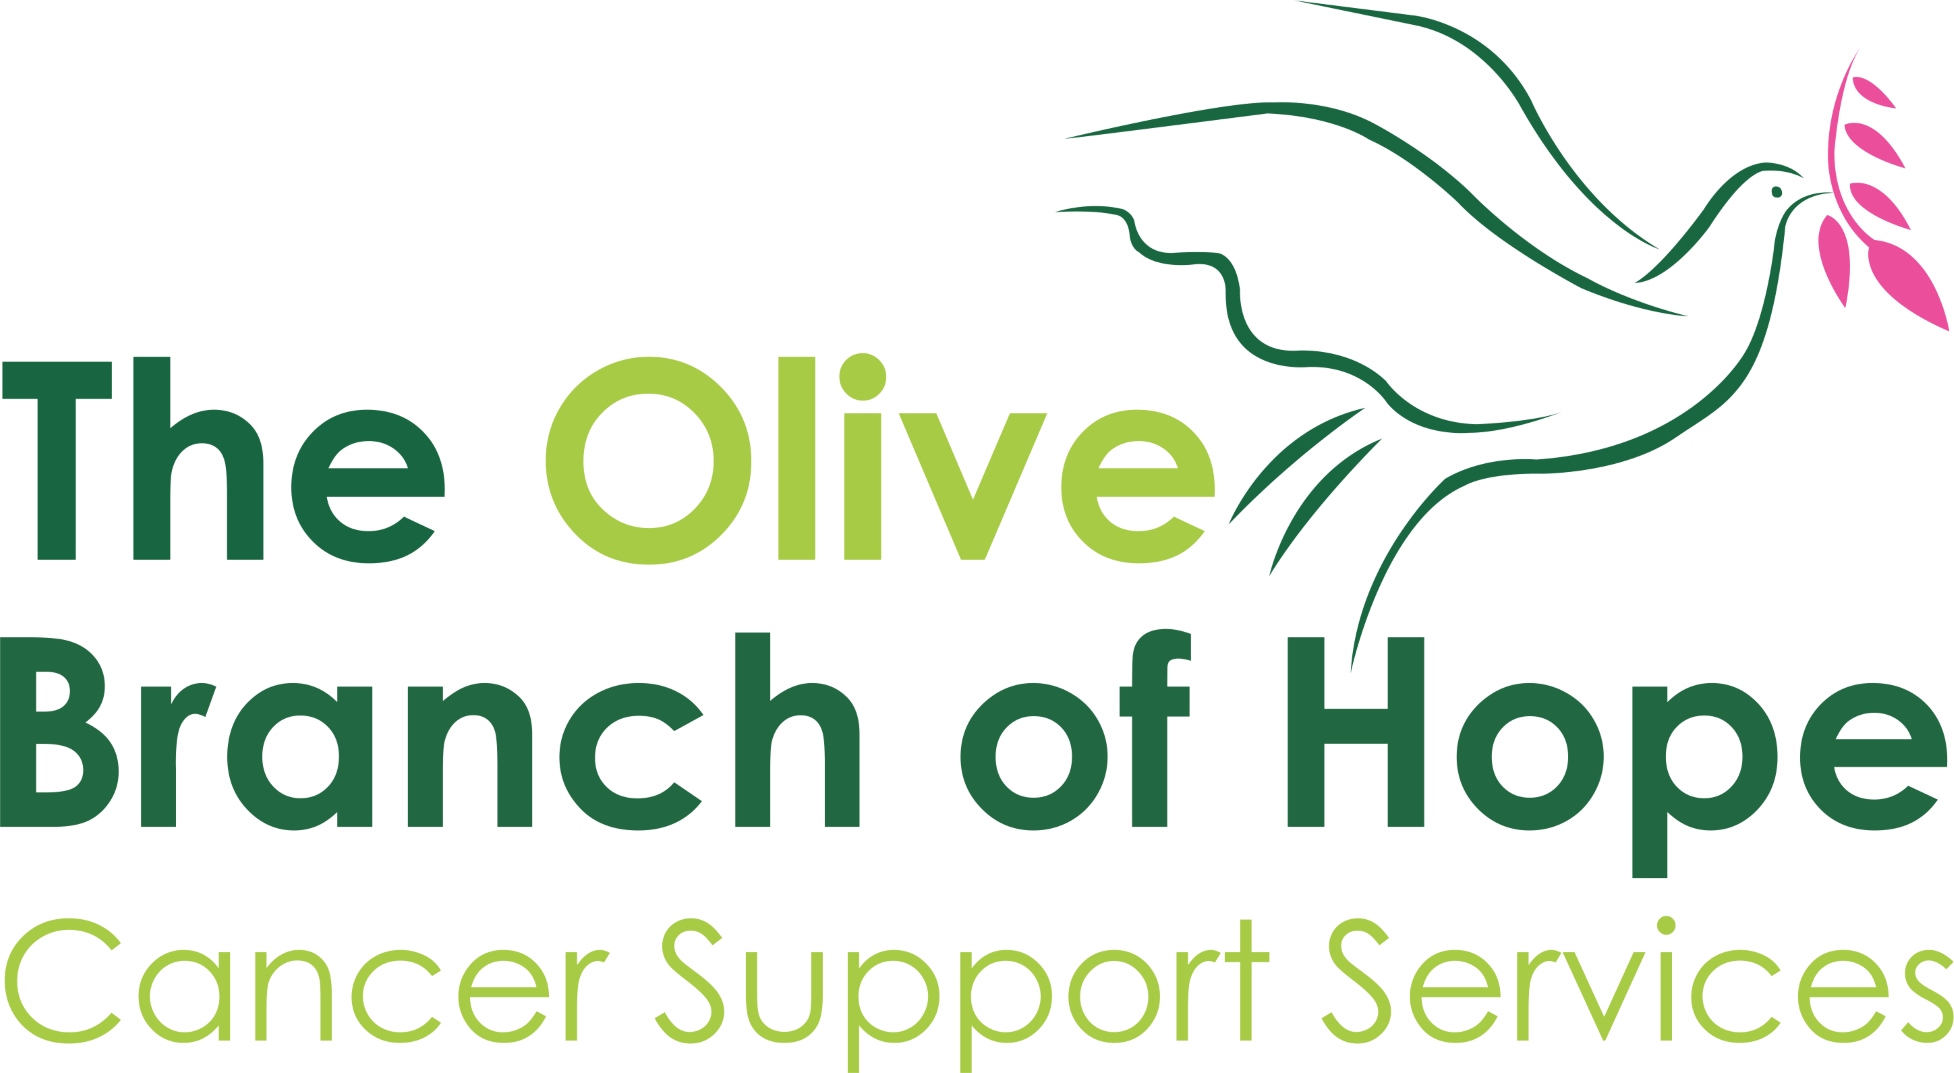 The Olive Branch of Hope